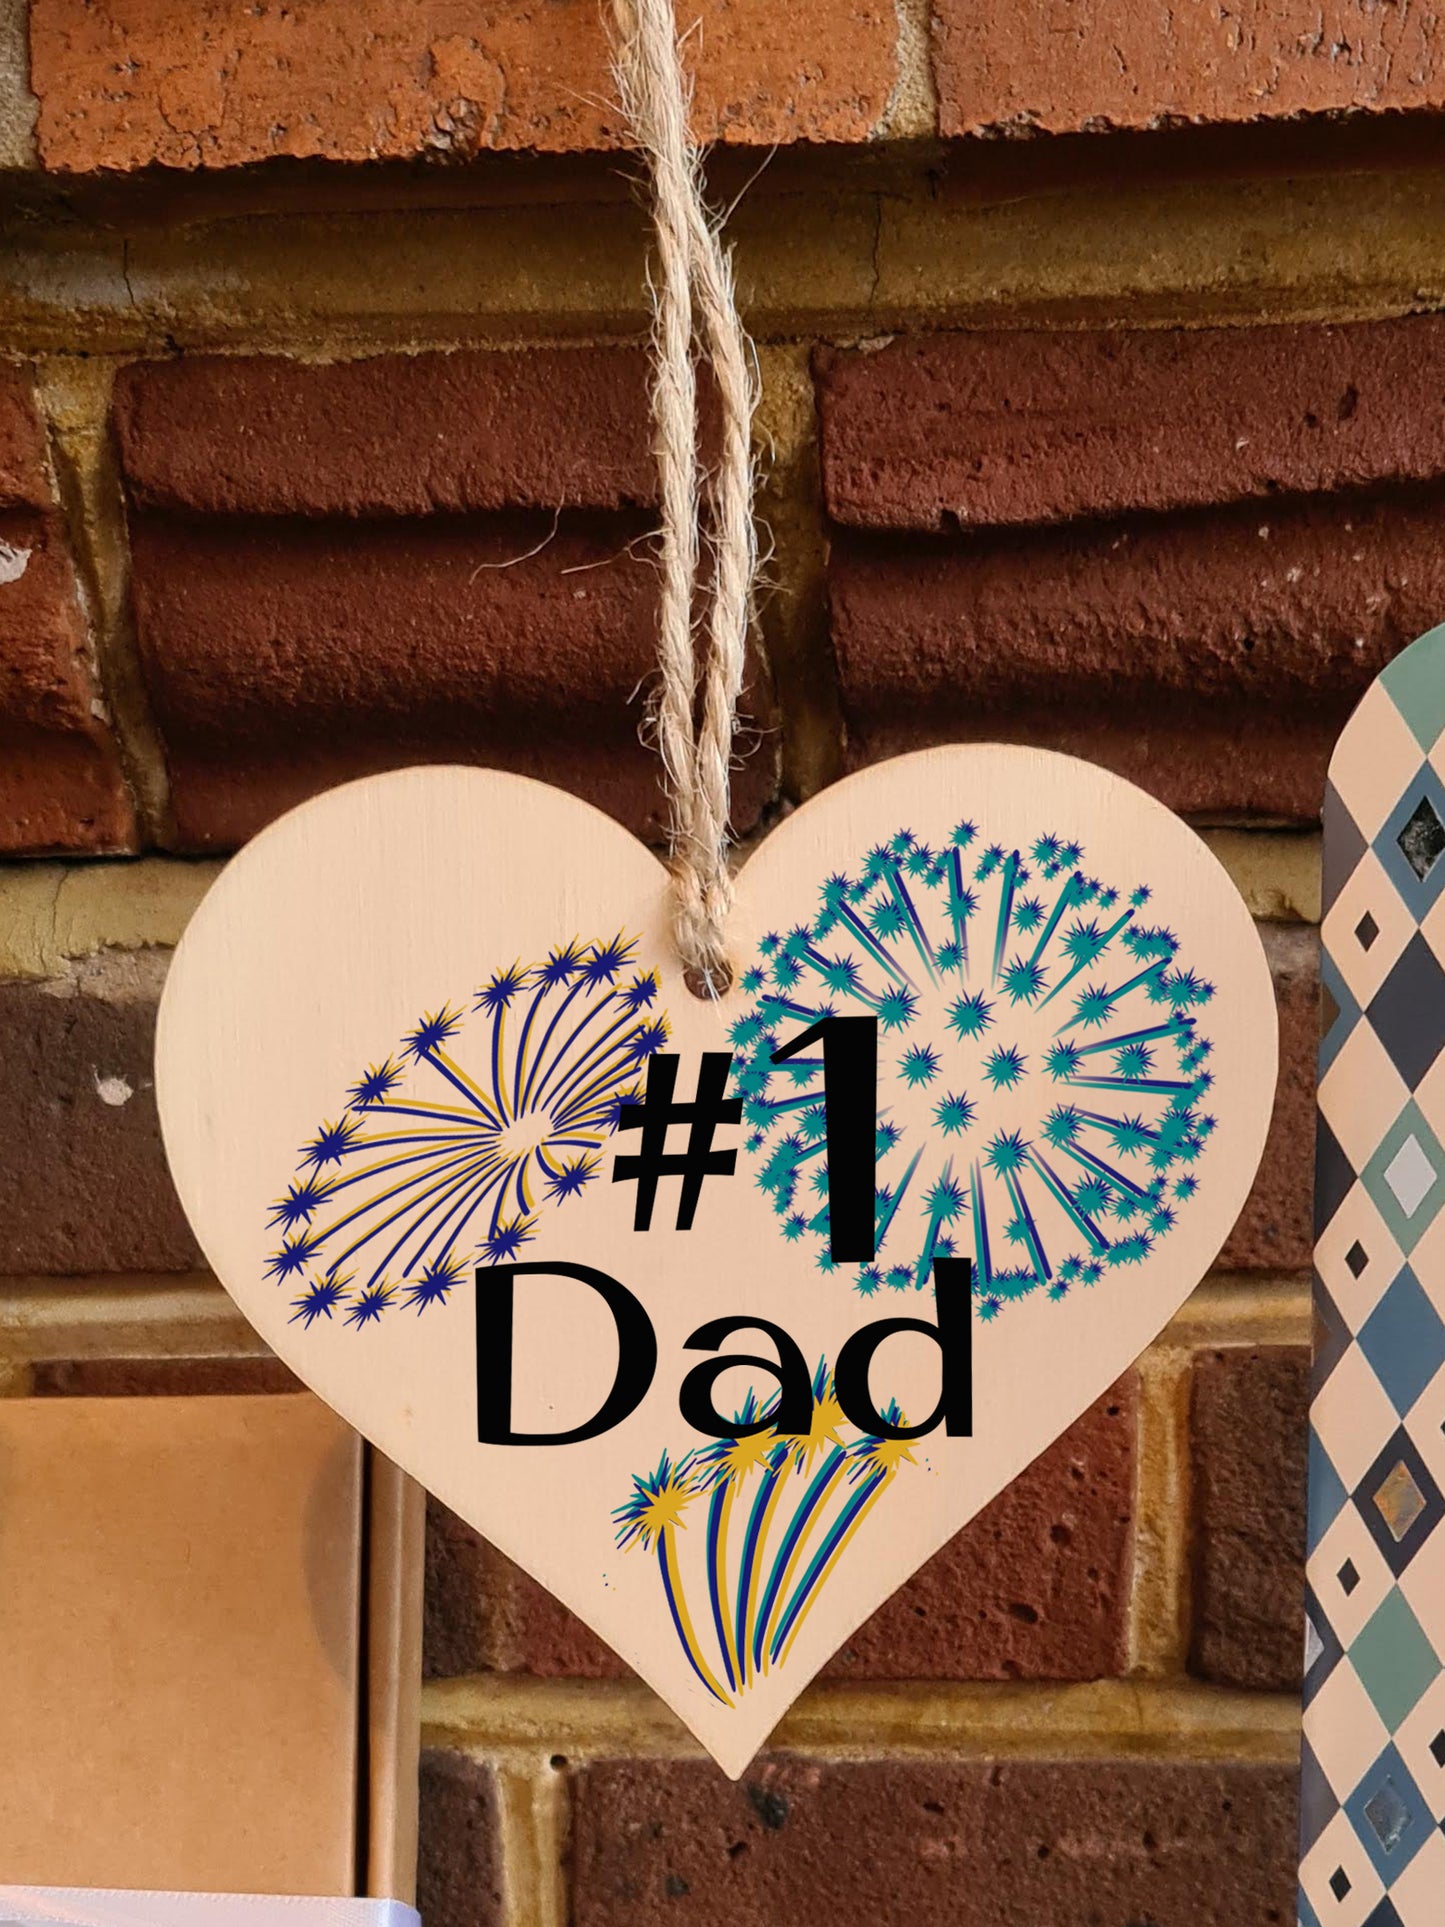 Handmade Wooden Hanging Heart Plaque Gift for Dad this Fathers Day Novelty Fun Thoughtful Keepsake